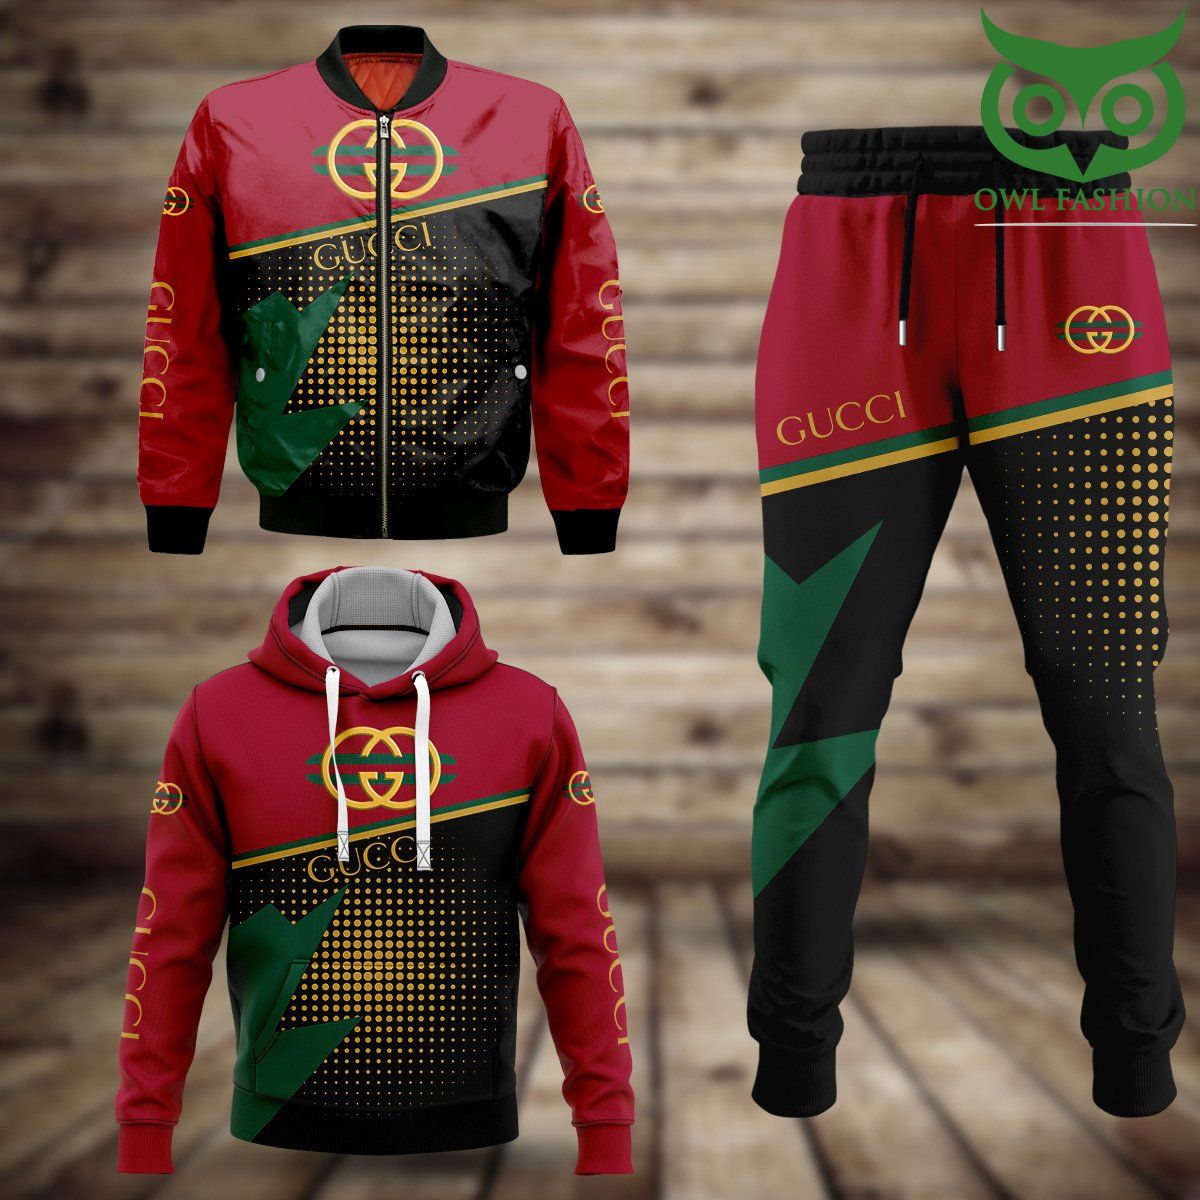 2 Gucci red green yellow Fashion Bomber Jacket Hoodie and Pants